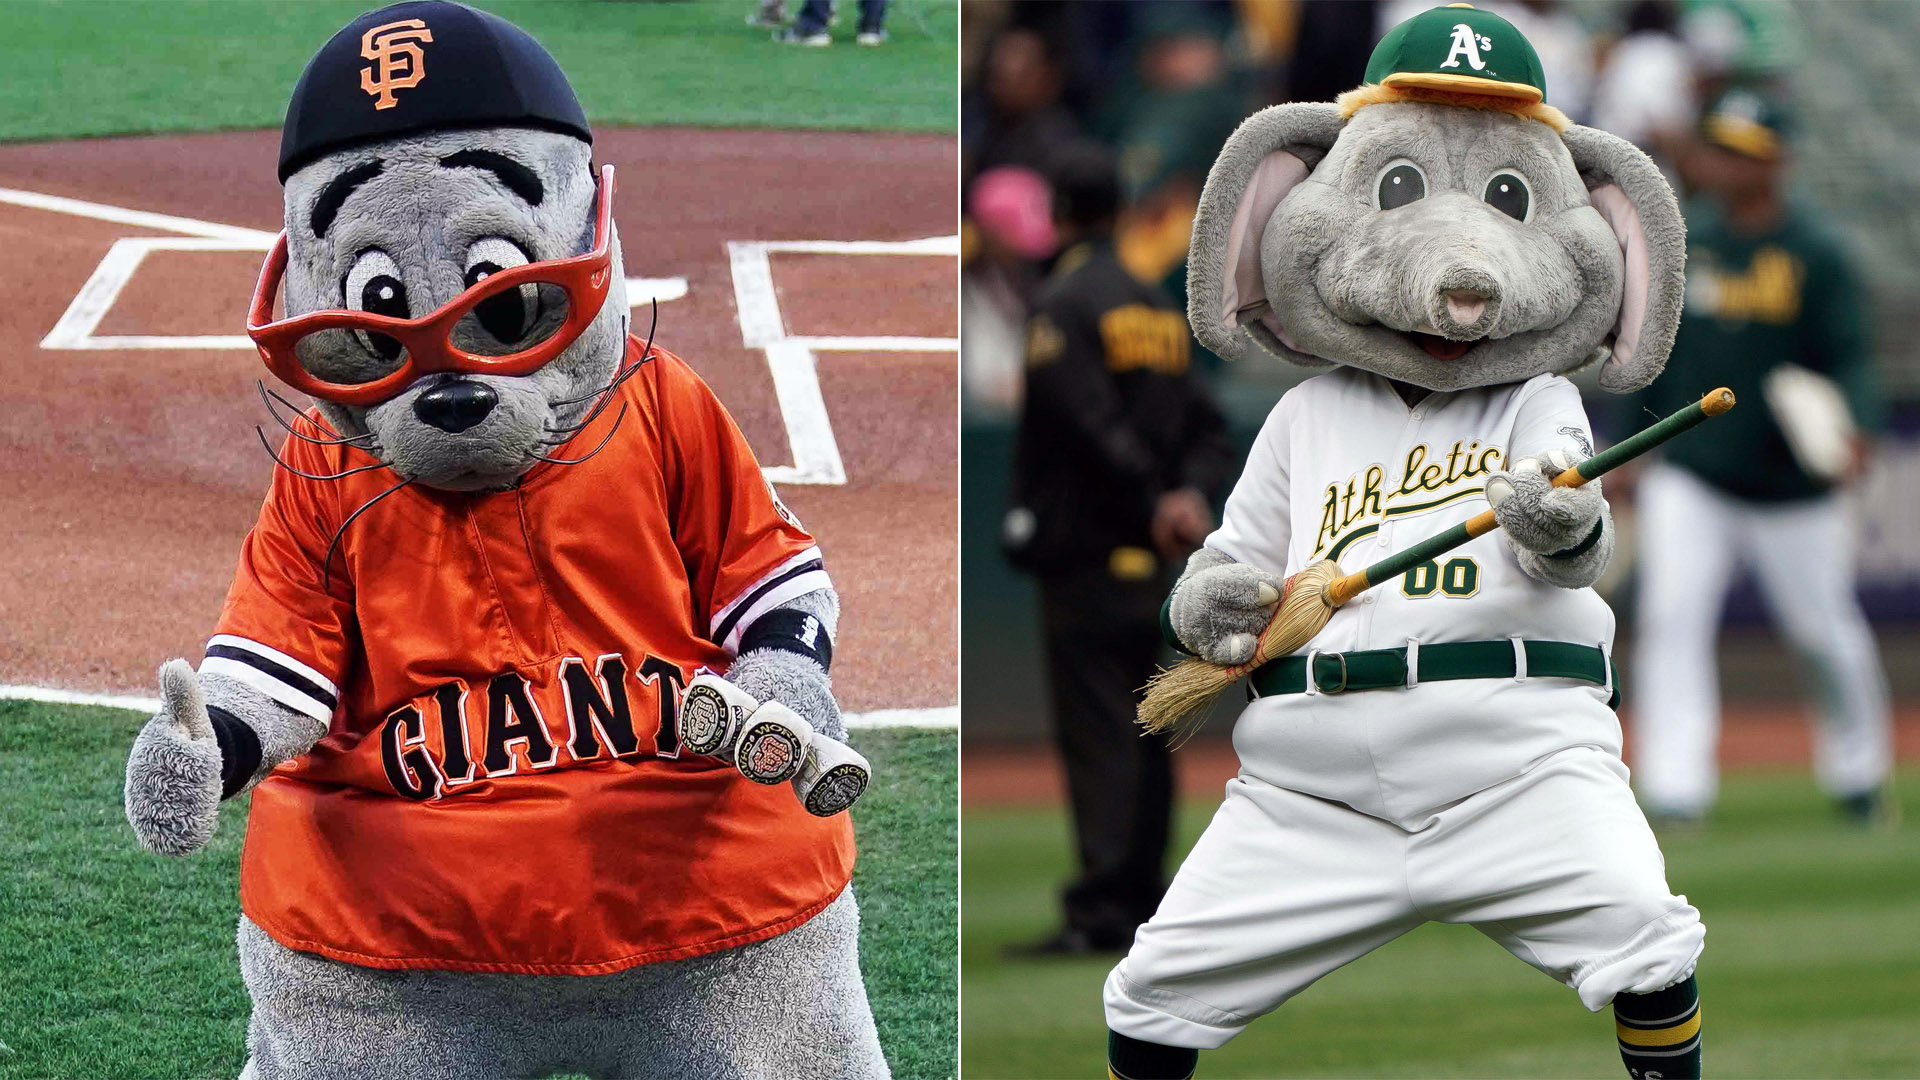 Giants Mascot Lou Seal, A's Mascot Stomper Have Heated Twitter